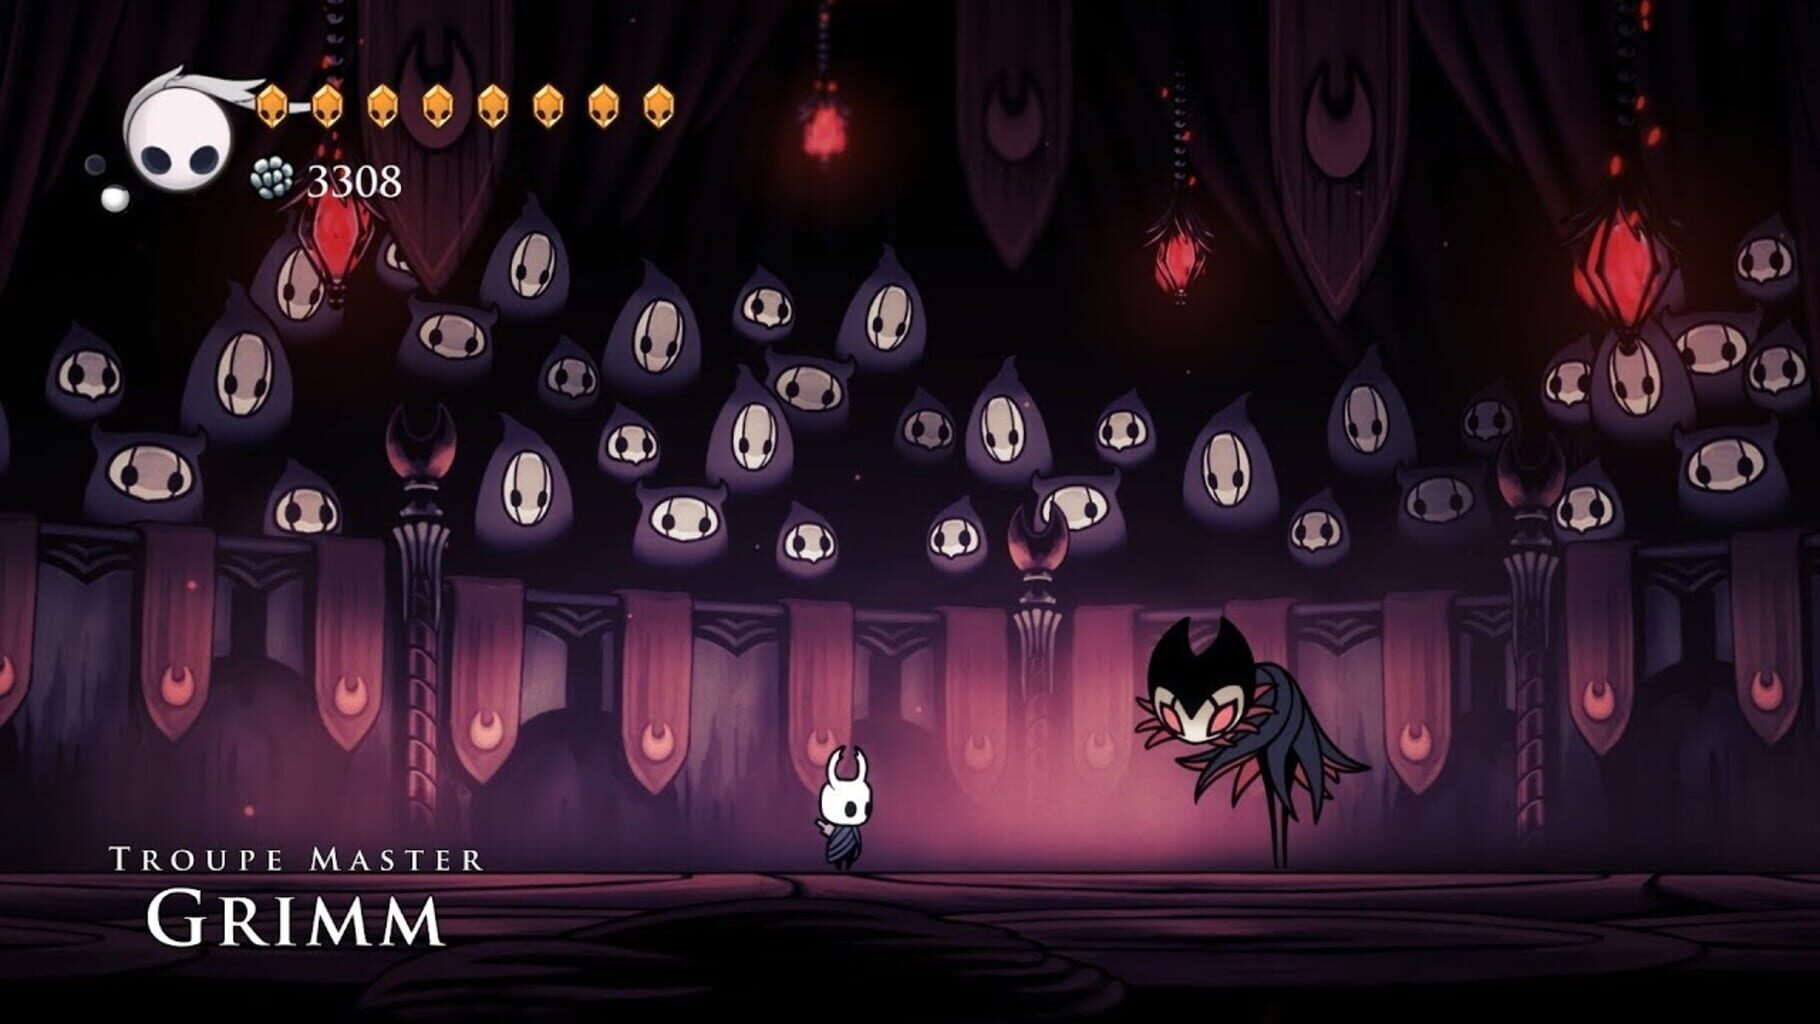 Hollow Knight: The Grimm Troupe screenshot